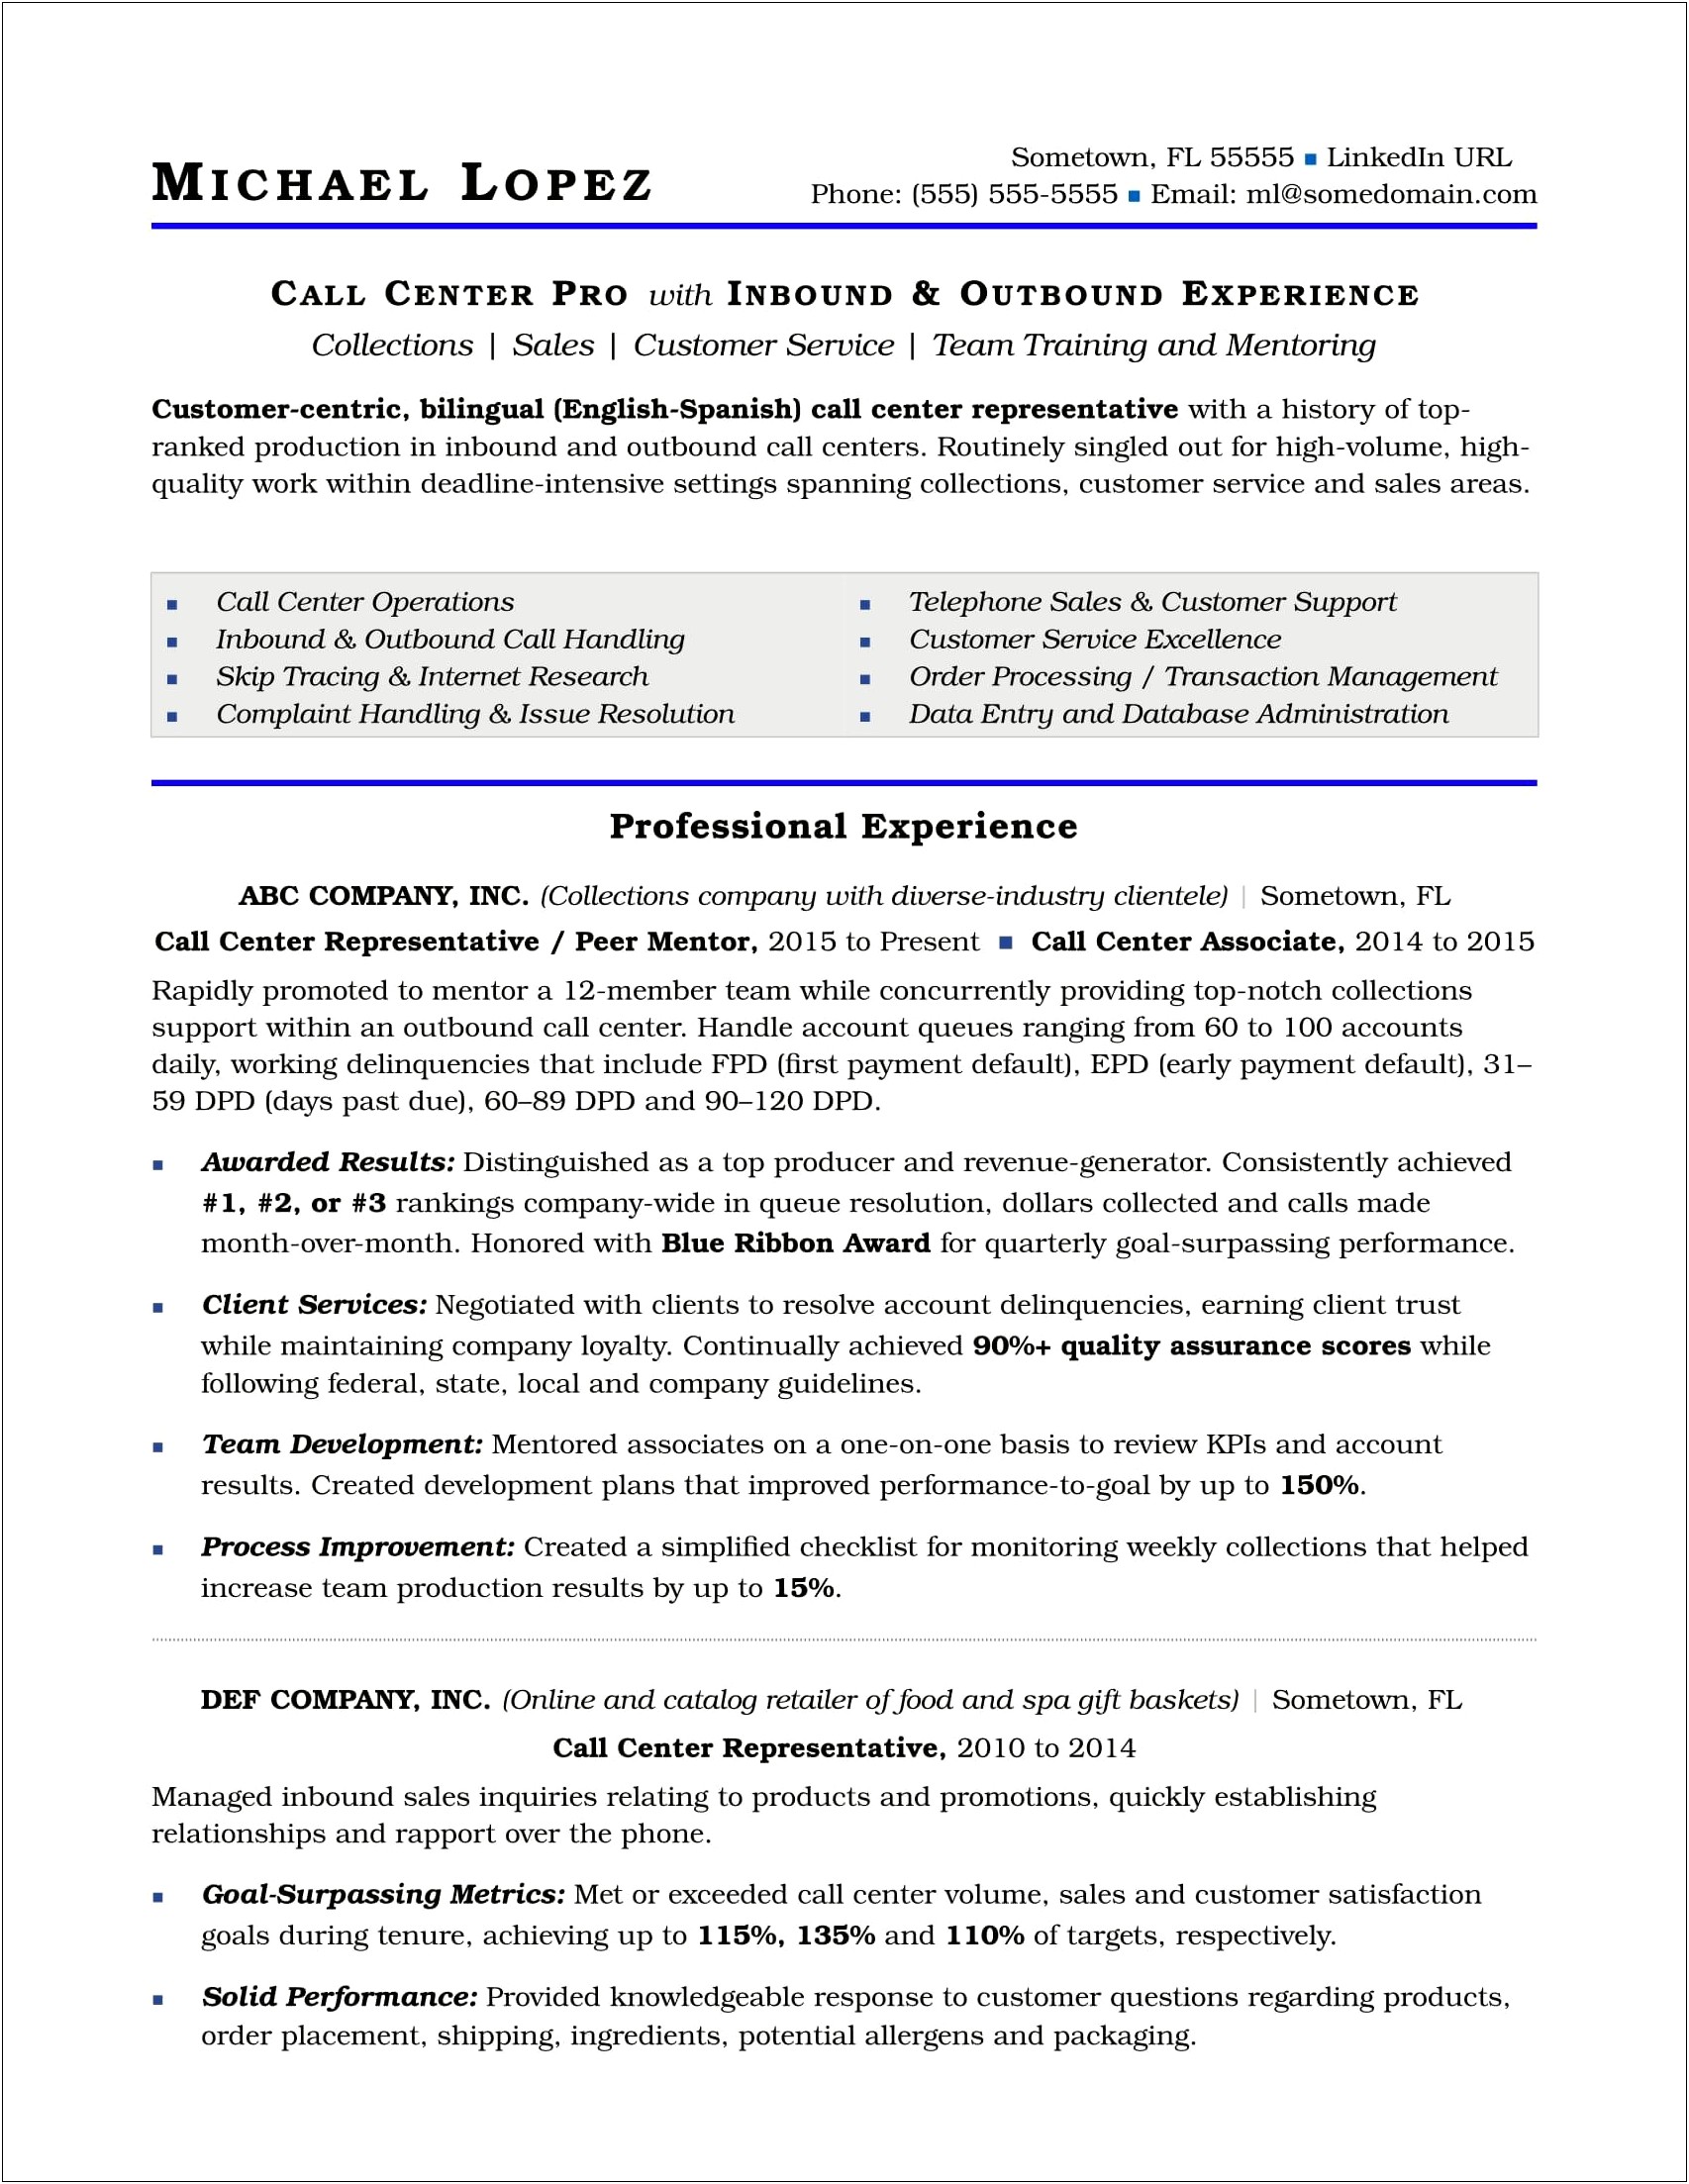 Resumes For Customer Service And Management